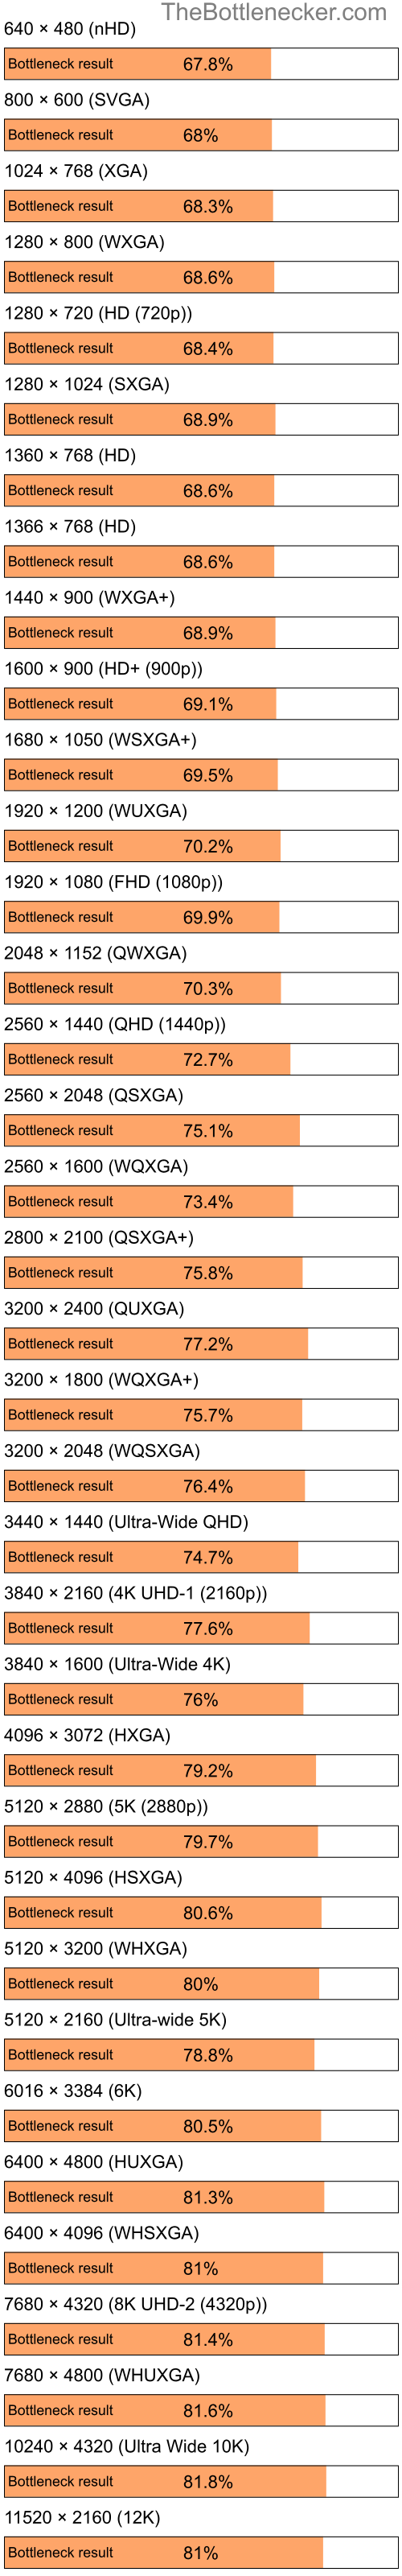 Bottleneck results by resolution for Intel Celeron and AMD Radeon 3000 in Graphic Card Intense Tasks